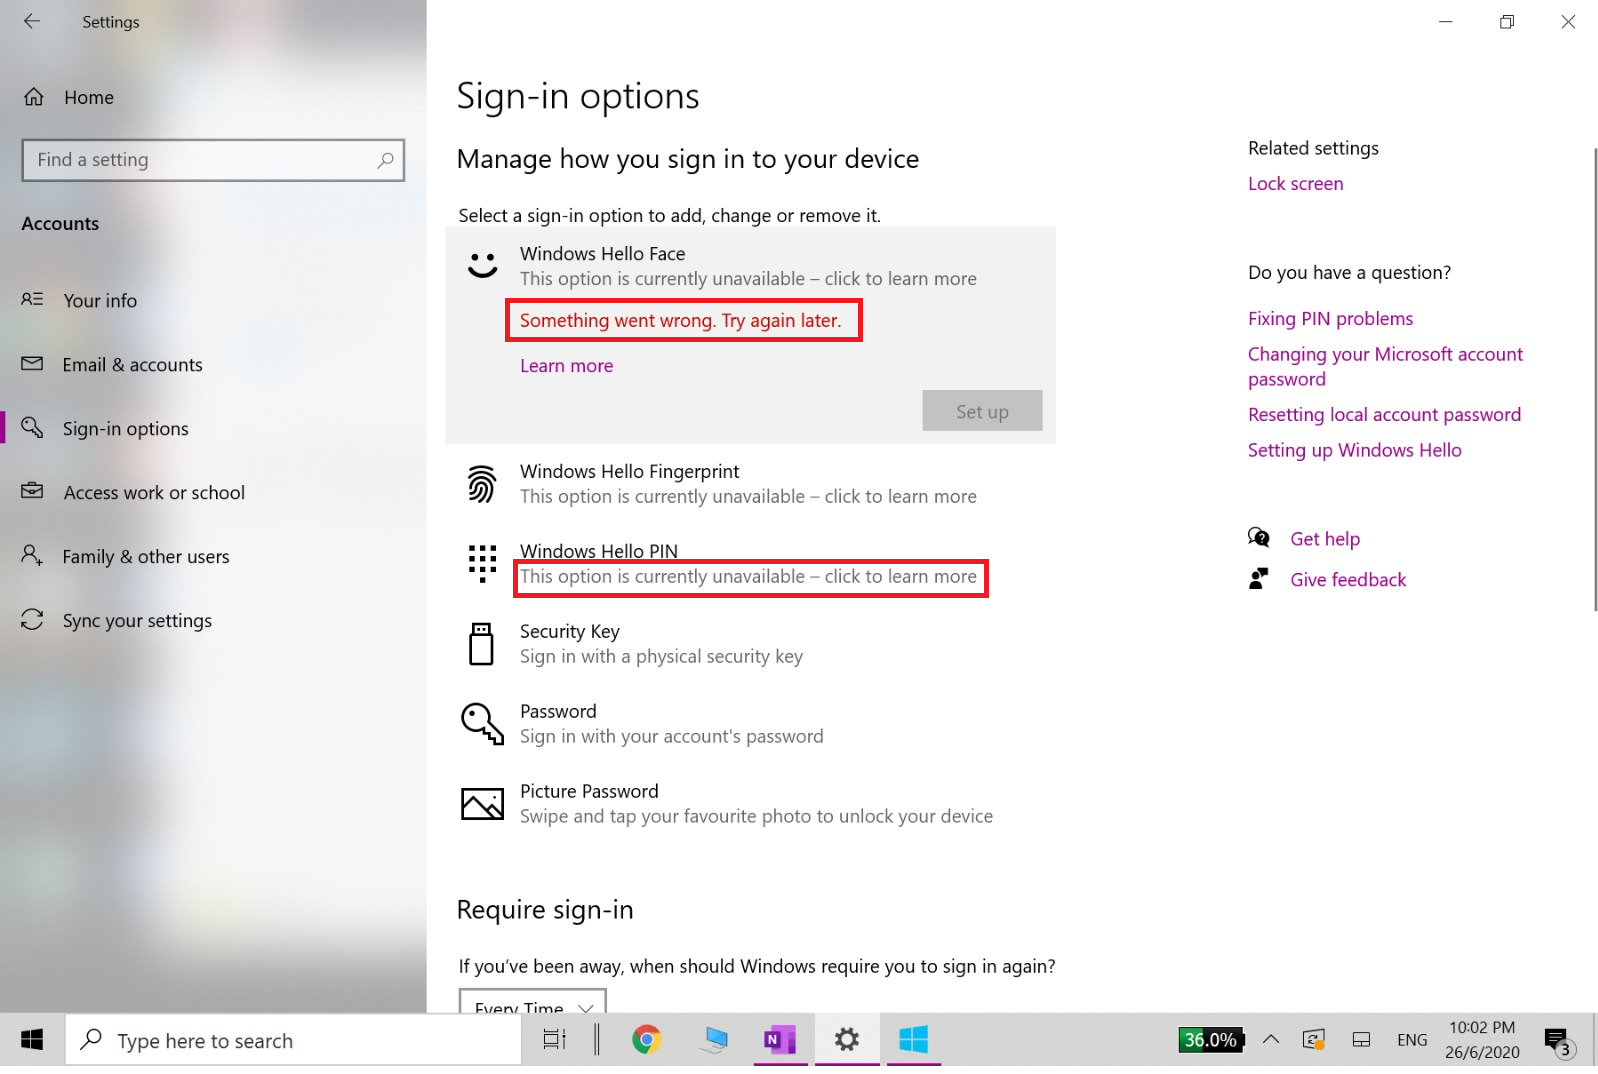 Windows 10 Sign-In Options issues 362d3340-5501-45ac-aed6-7b1aeaf98e09?upload=true.png